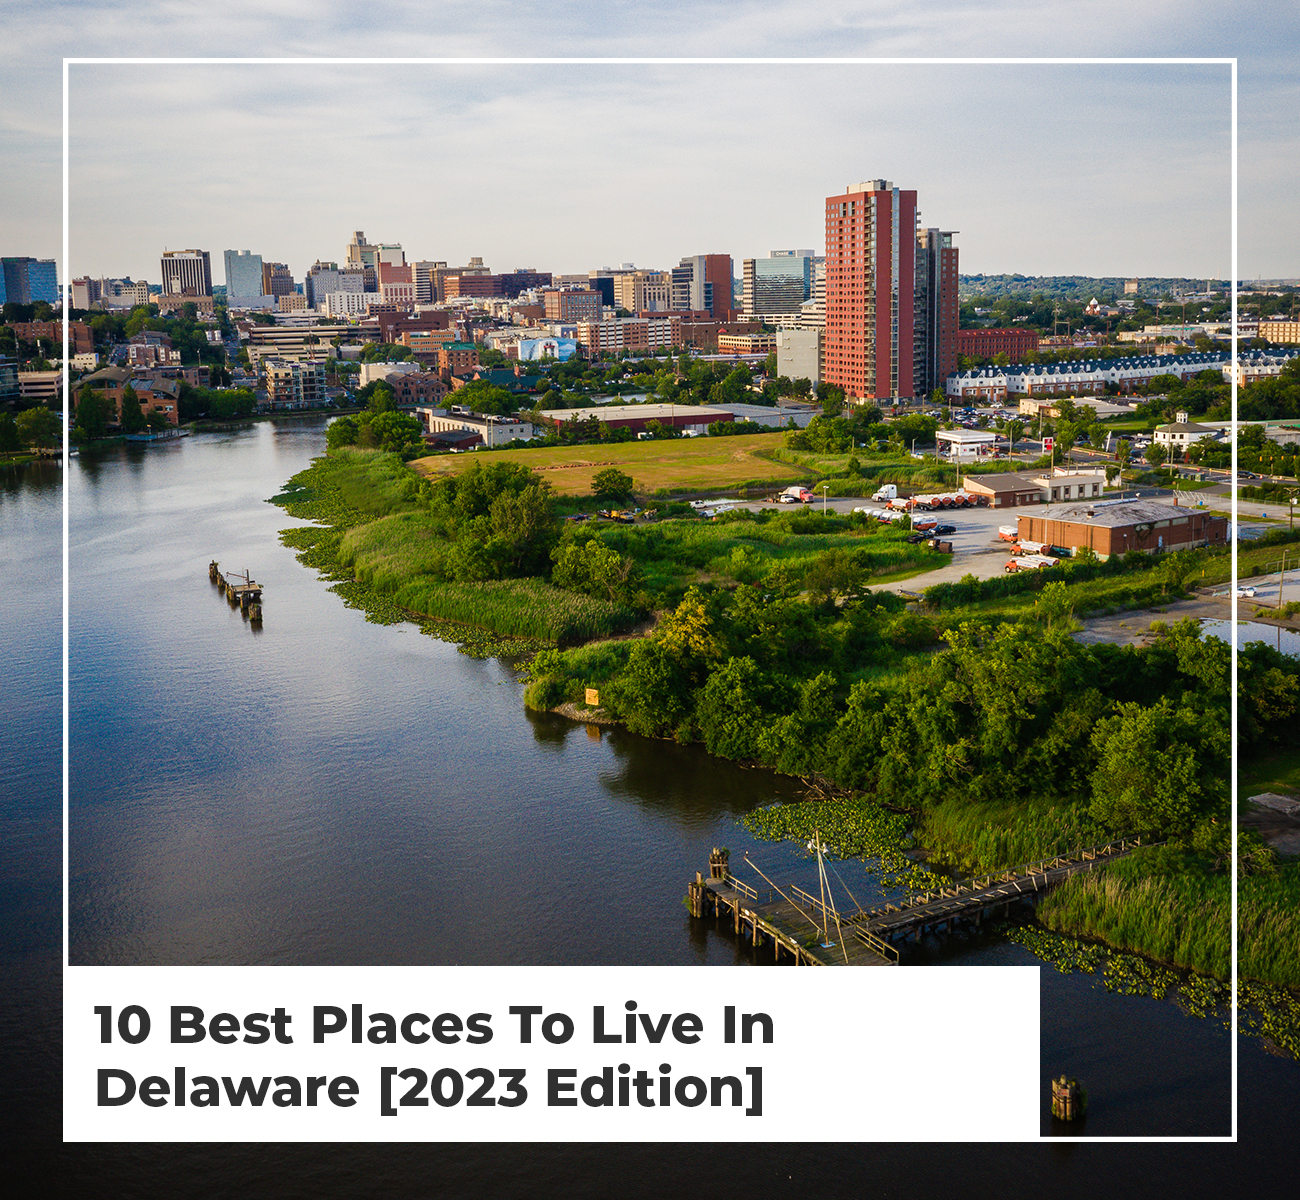 10 Best Places To Live In Delaware [2023 Edition]